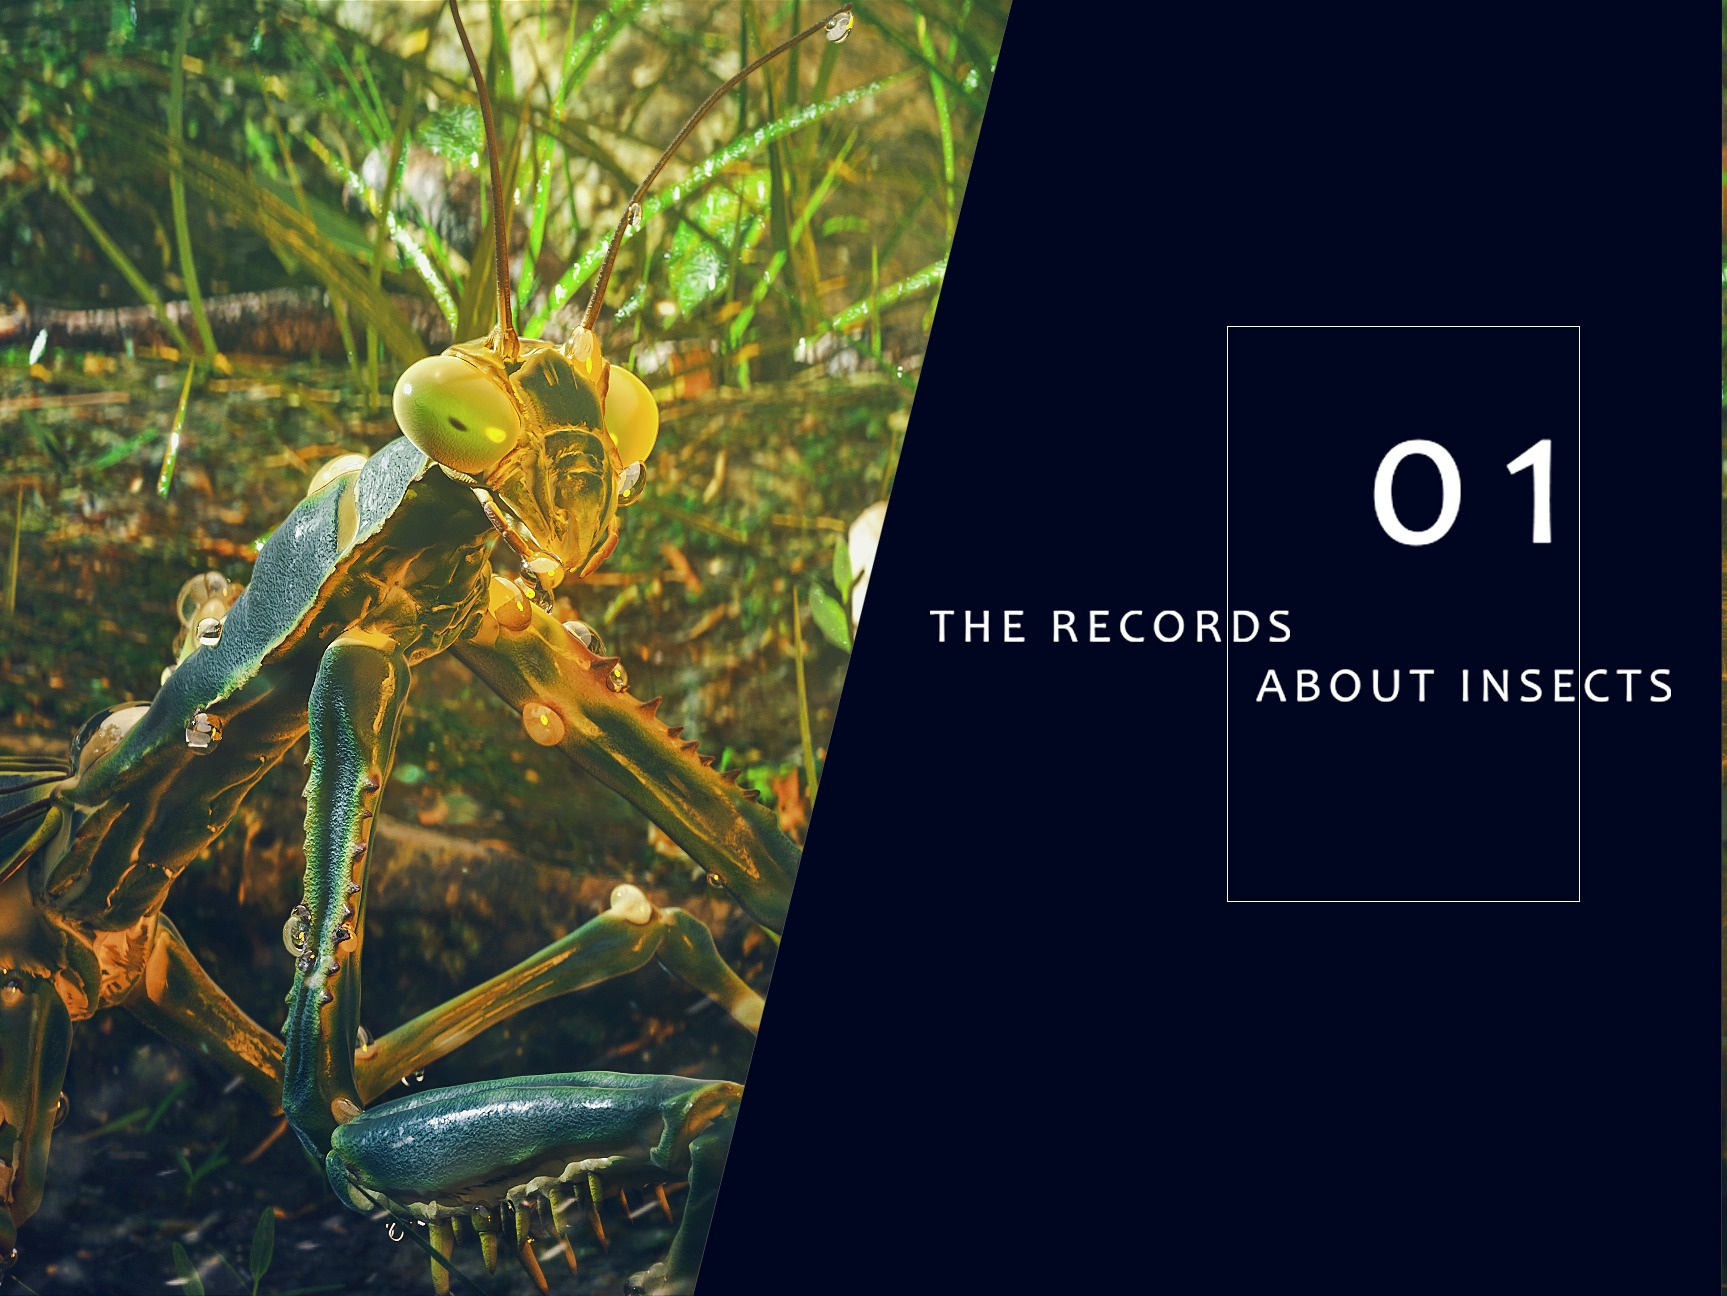 THE RECORDS ABOUT INSECTS